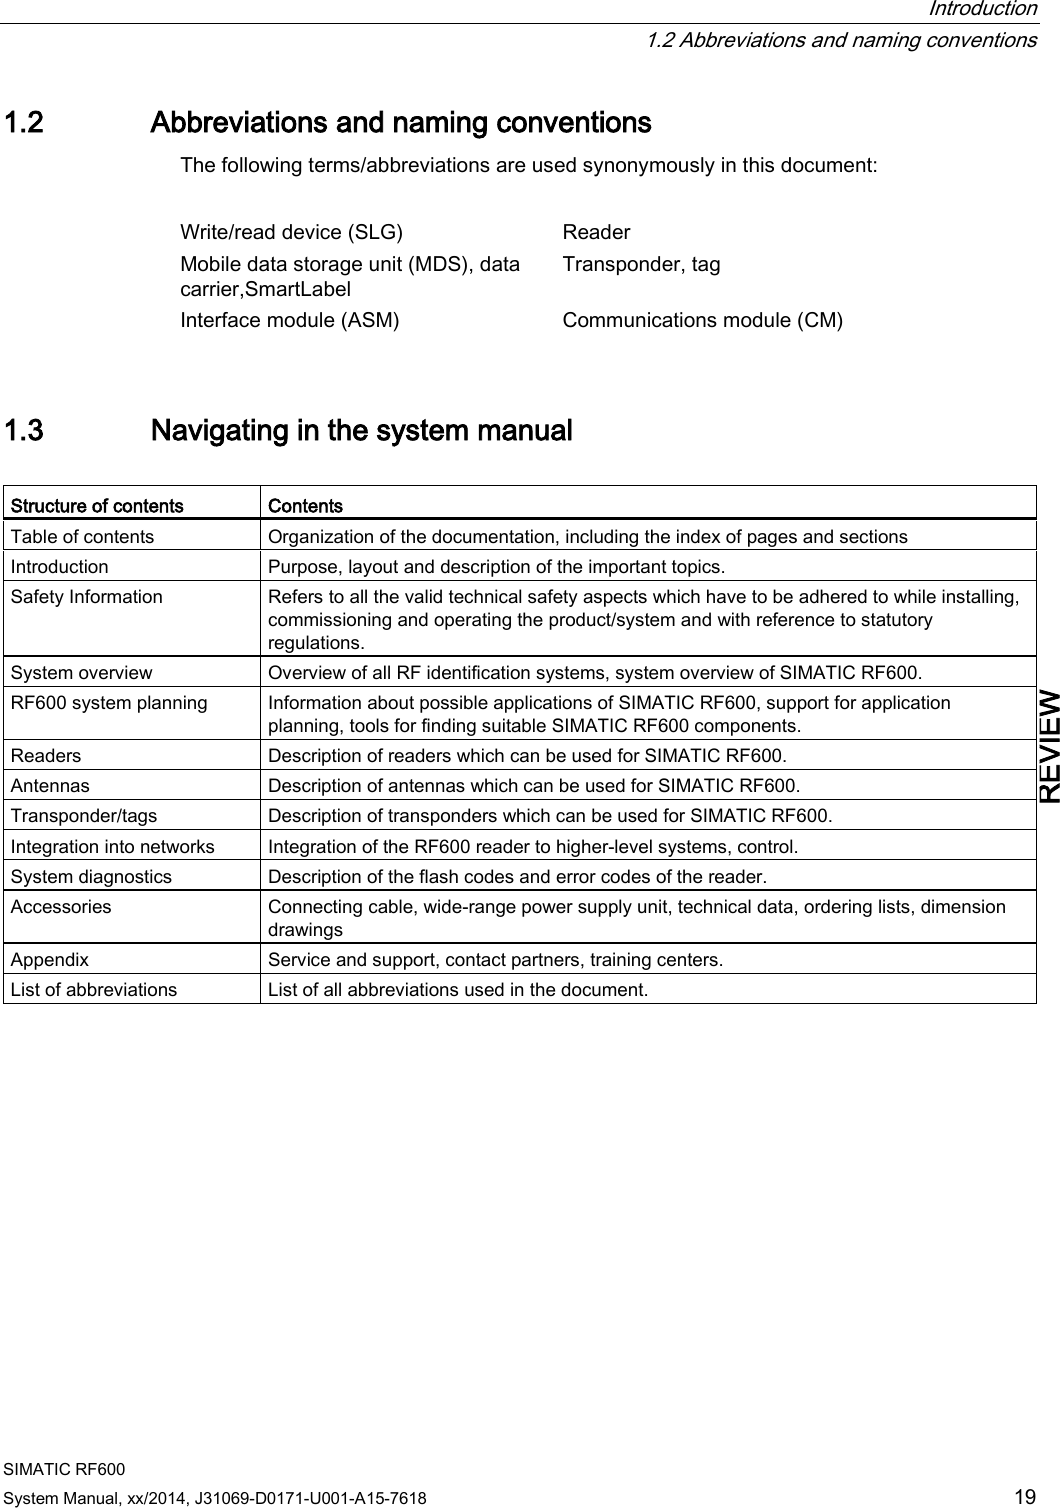  Introduction  1.2 Abbreviations and naming conventions SIMATIC RF600 System Manual, xx/2014, J31069-D0171-U001-A15-7618 19 REVIEW 1.2 Abbreviations and naming conventions The following terms/abbreviations are used synonymously in this document:  Write/read device (SLG) Reader Mobile data storage unit (MDS), data carrier,SmartLabel Transponder, tag Interface module (ASM) Communications module (CM) 1.3 Navigating in the system manual  Structure of contents  Contents Table of contents Organization of the documentation, including the index of pages and sections Introduction Purpose, layout and description of the important topics. Safety Information Refers to all the valid technical safety aspects which have to be adhered to while installing, commissioning and operating the product/system and with reference to statutory regulations. System overview Overview of all RF identification systems, system overview of SIMATIC RF600. RF600 system planning Information about possible applications of SIMATIC RF600, support for application planning, tools for finding suitable SIMATIC RF600 components.  Readers  Description of readers which can be used for SIMATIC RF600. Antennas Description of antennas which can be used for SIMATIC RF600. Transponder/tags Description of transponders which can be used for SIMATIC RF600. Integration into networks Integration of the RF600 reader to higher-level systems, control. System diagnostics Description of the flash codes and error codes of the reader. Accessories Connecting cable, wide-range power supply unit, technical data, ordering lists, dimension drawings Appendix Service and support, contact partners, training centers. List of abbreviations List of all abbreviations used in the document.  